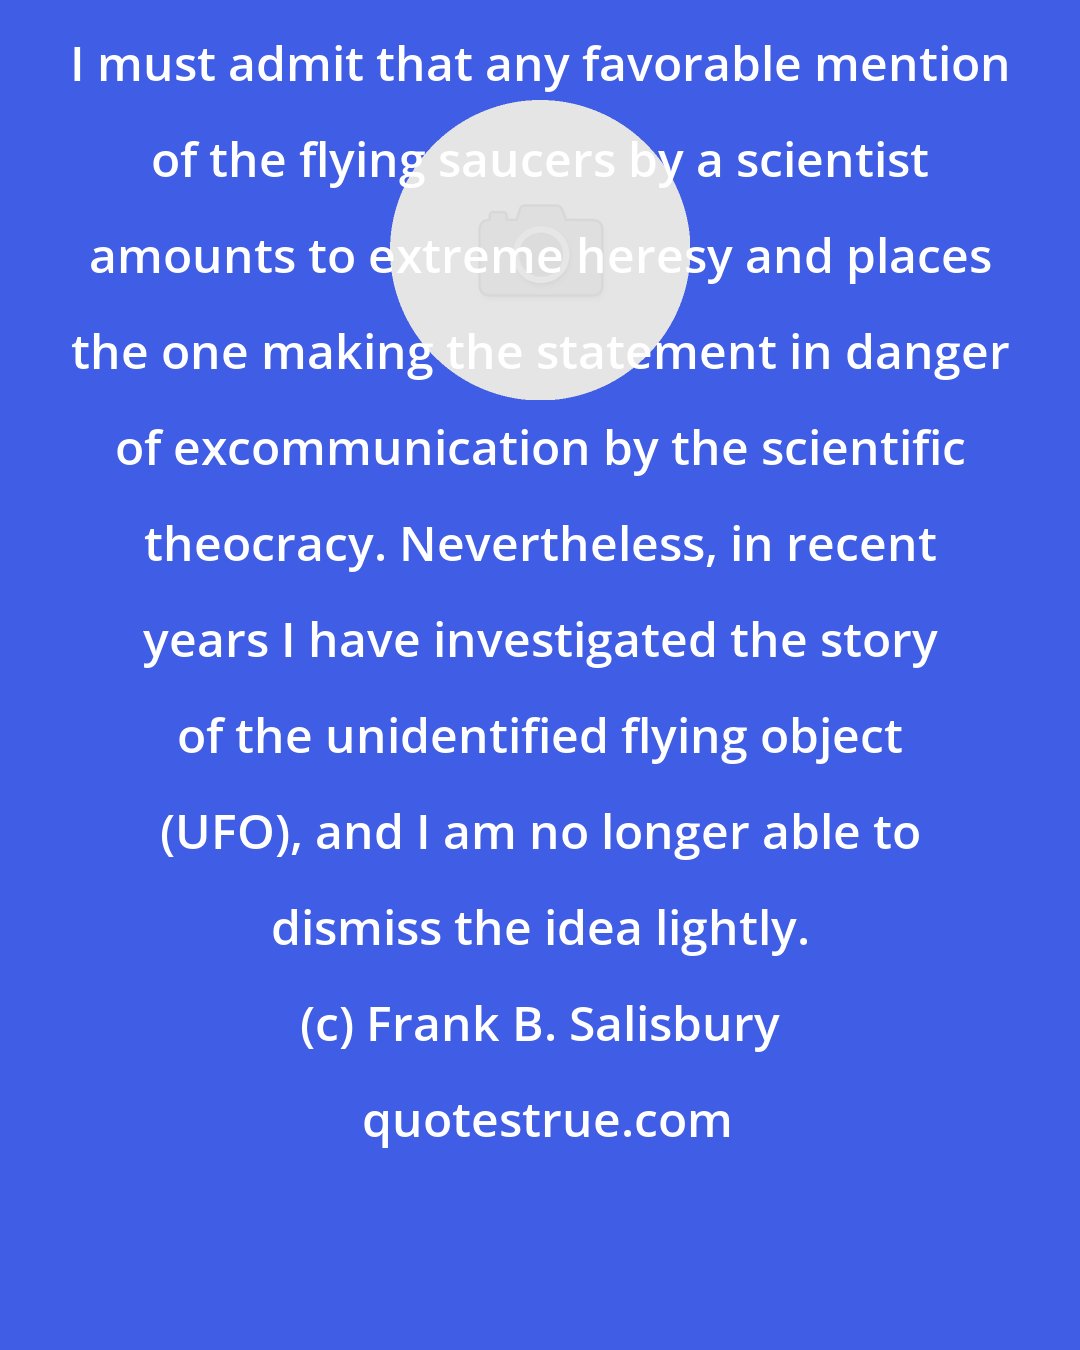 Frank B. Salisbury: I must admit that any favorable mention of the flying saucers by a scientist amounts to extreme heresy and places the one making the statement in danger of excommunication by the scientific theocracy. Nevertheless, in recent years I have investigated the story of the unidentified flying object (UFO), and I am no longer able to dismiss the idea lightly.